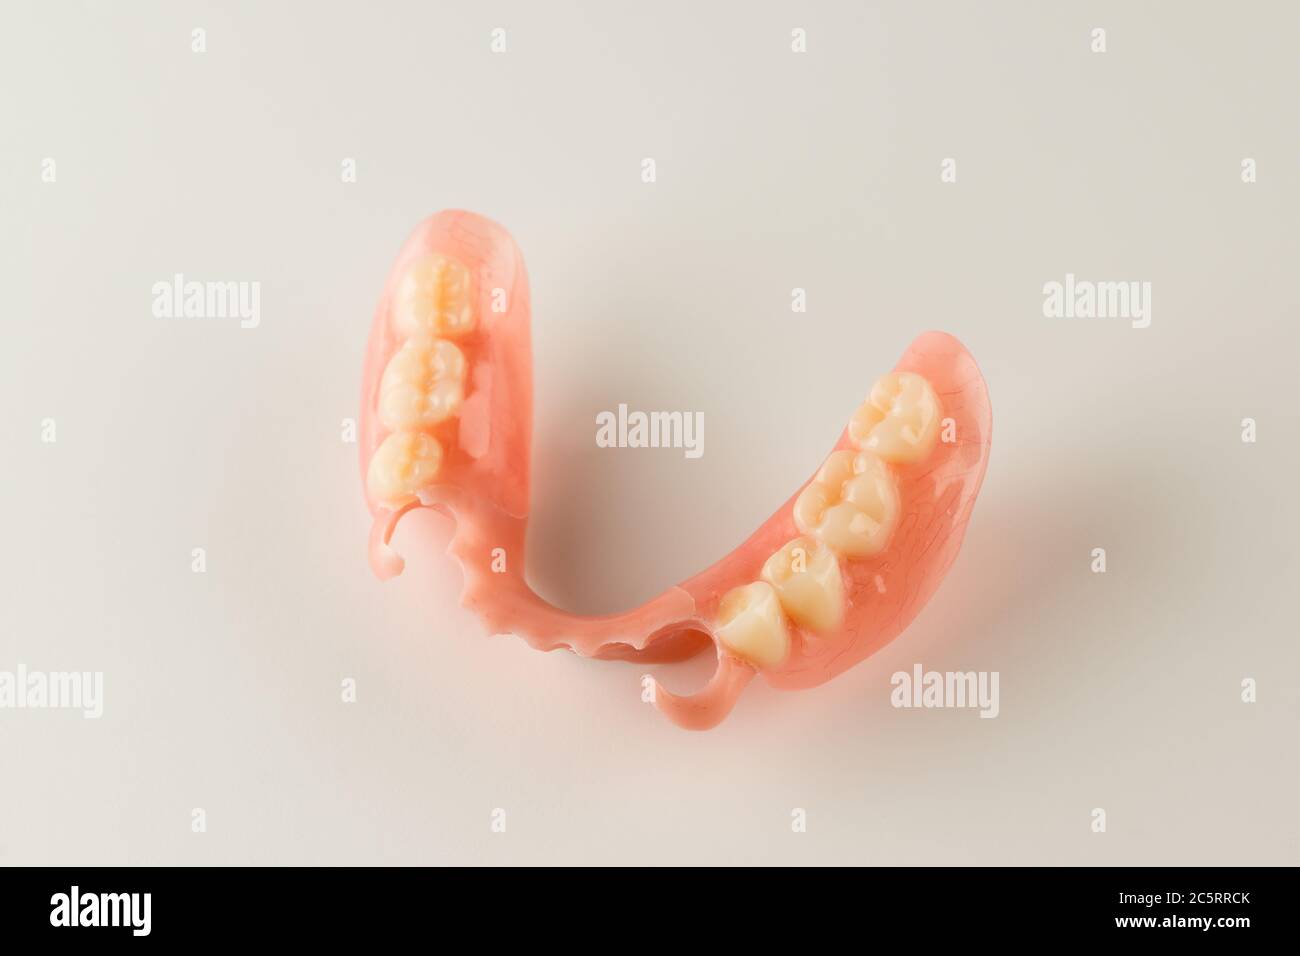 large image of a modern denture on a white background Stock Photo